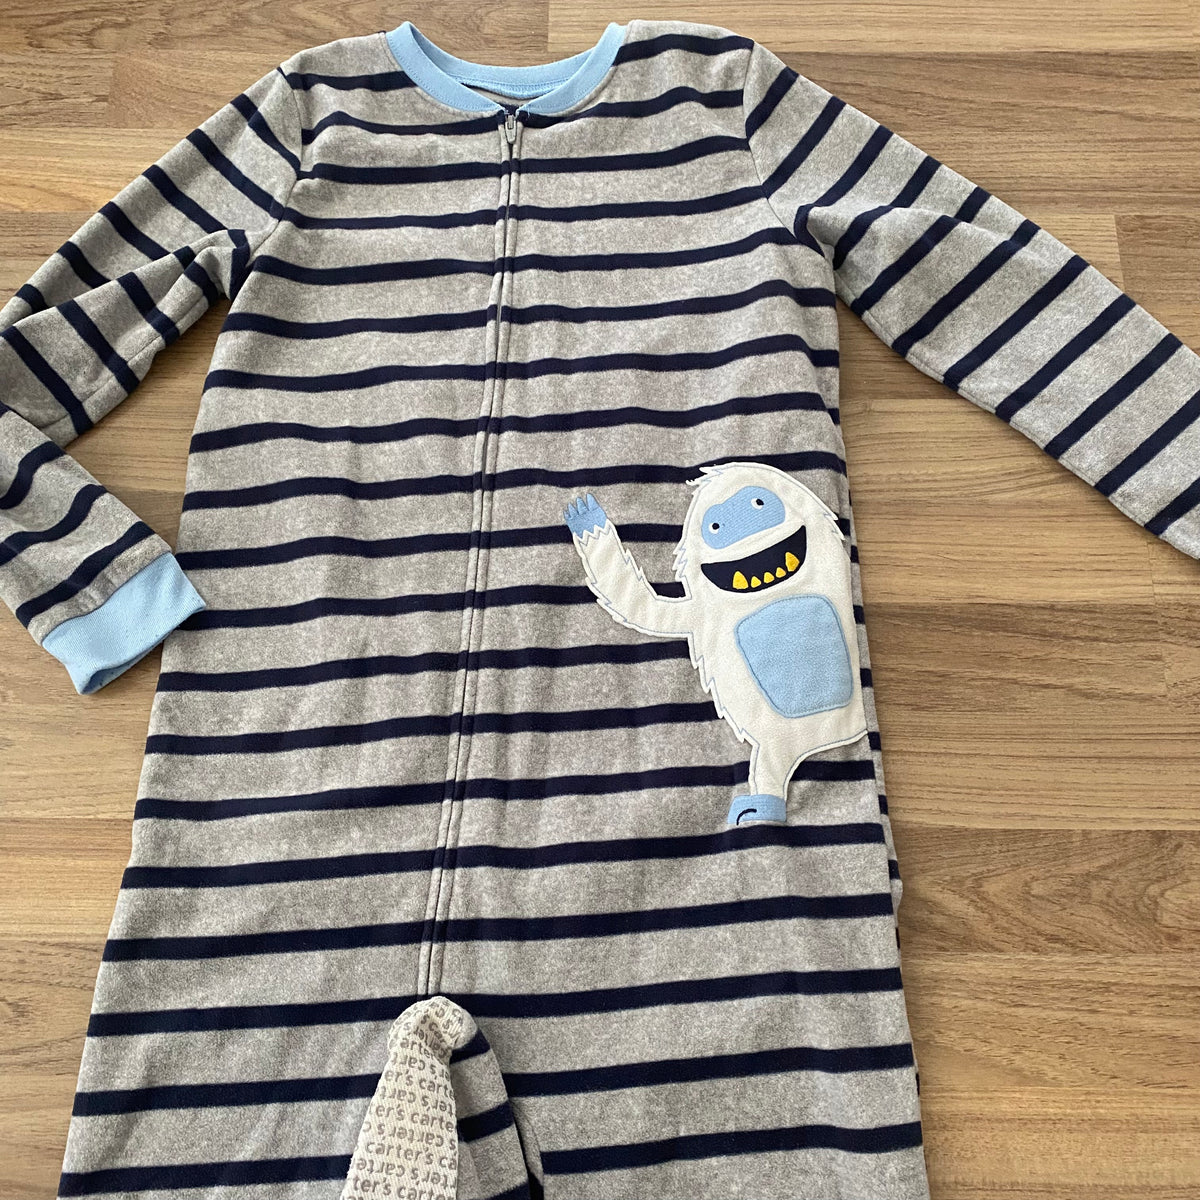 One Piece Footed PJ&#39;s (Boys Size 10)